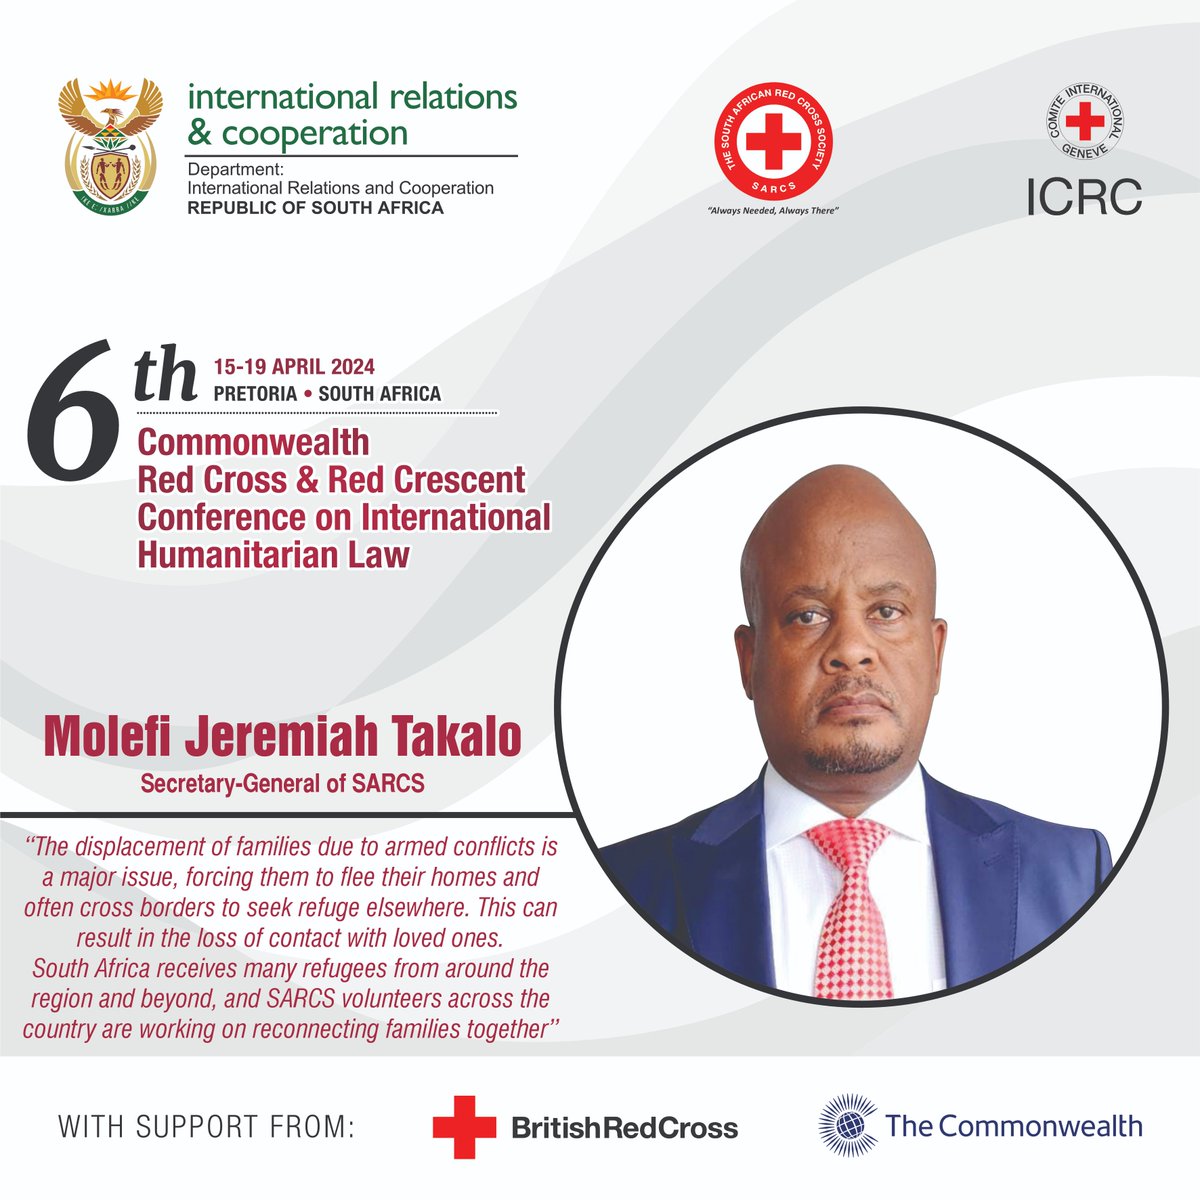 Speaking at the Commonwealth Conference, @molefi_taka shared how the @SARedCross has been instrumental in alleviating the suffering of those displaced by armed conflict elsewhere. He praised the work done by volunteers on the ground who reconnect families daily! #Humanity